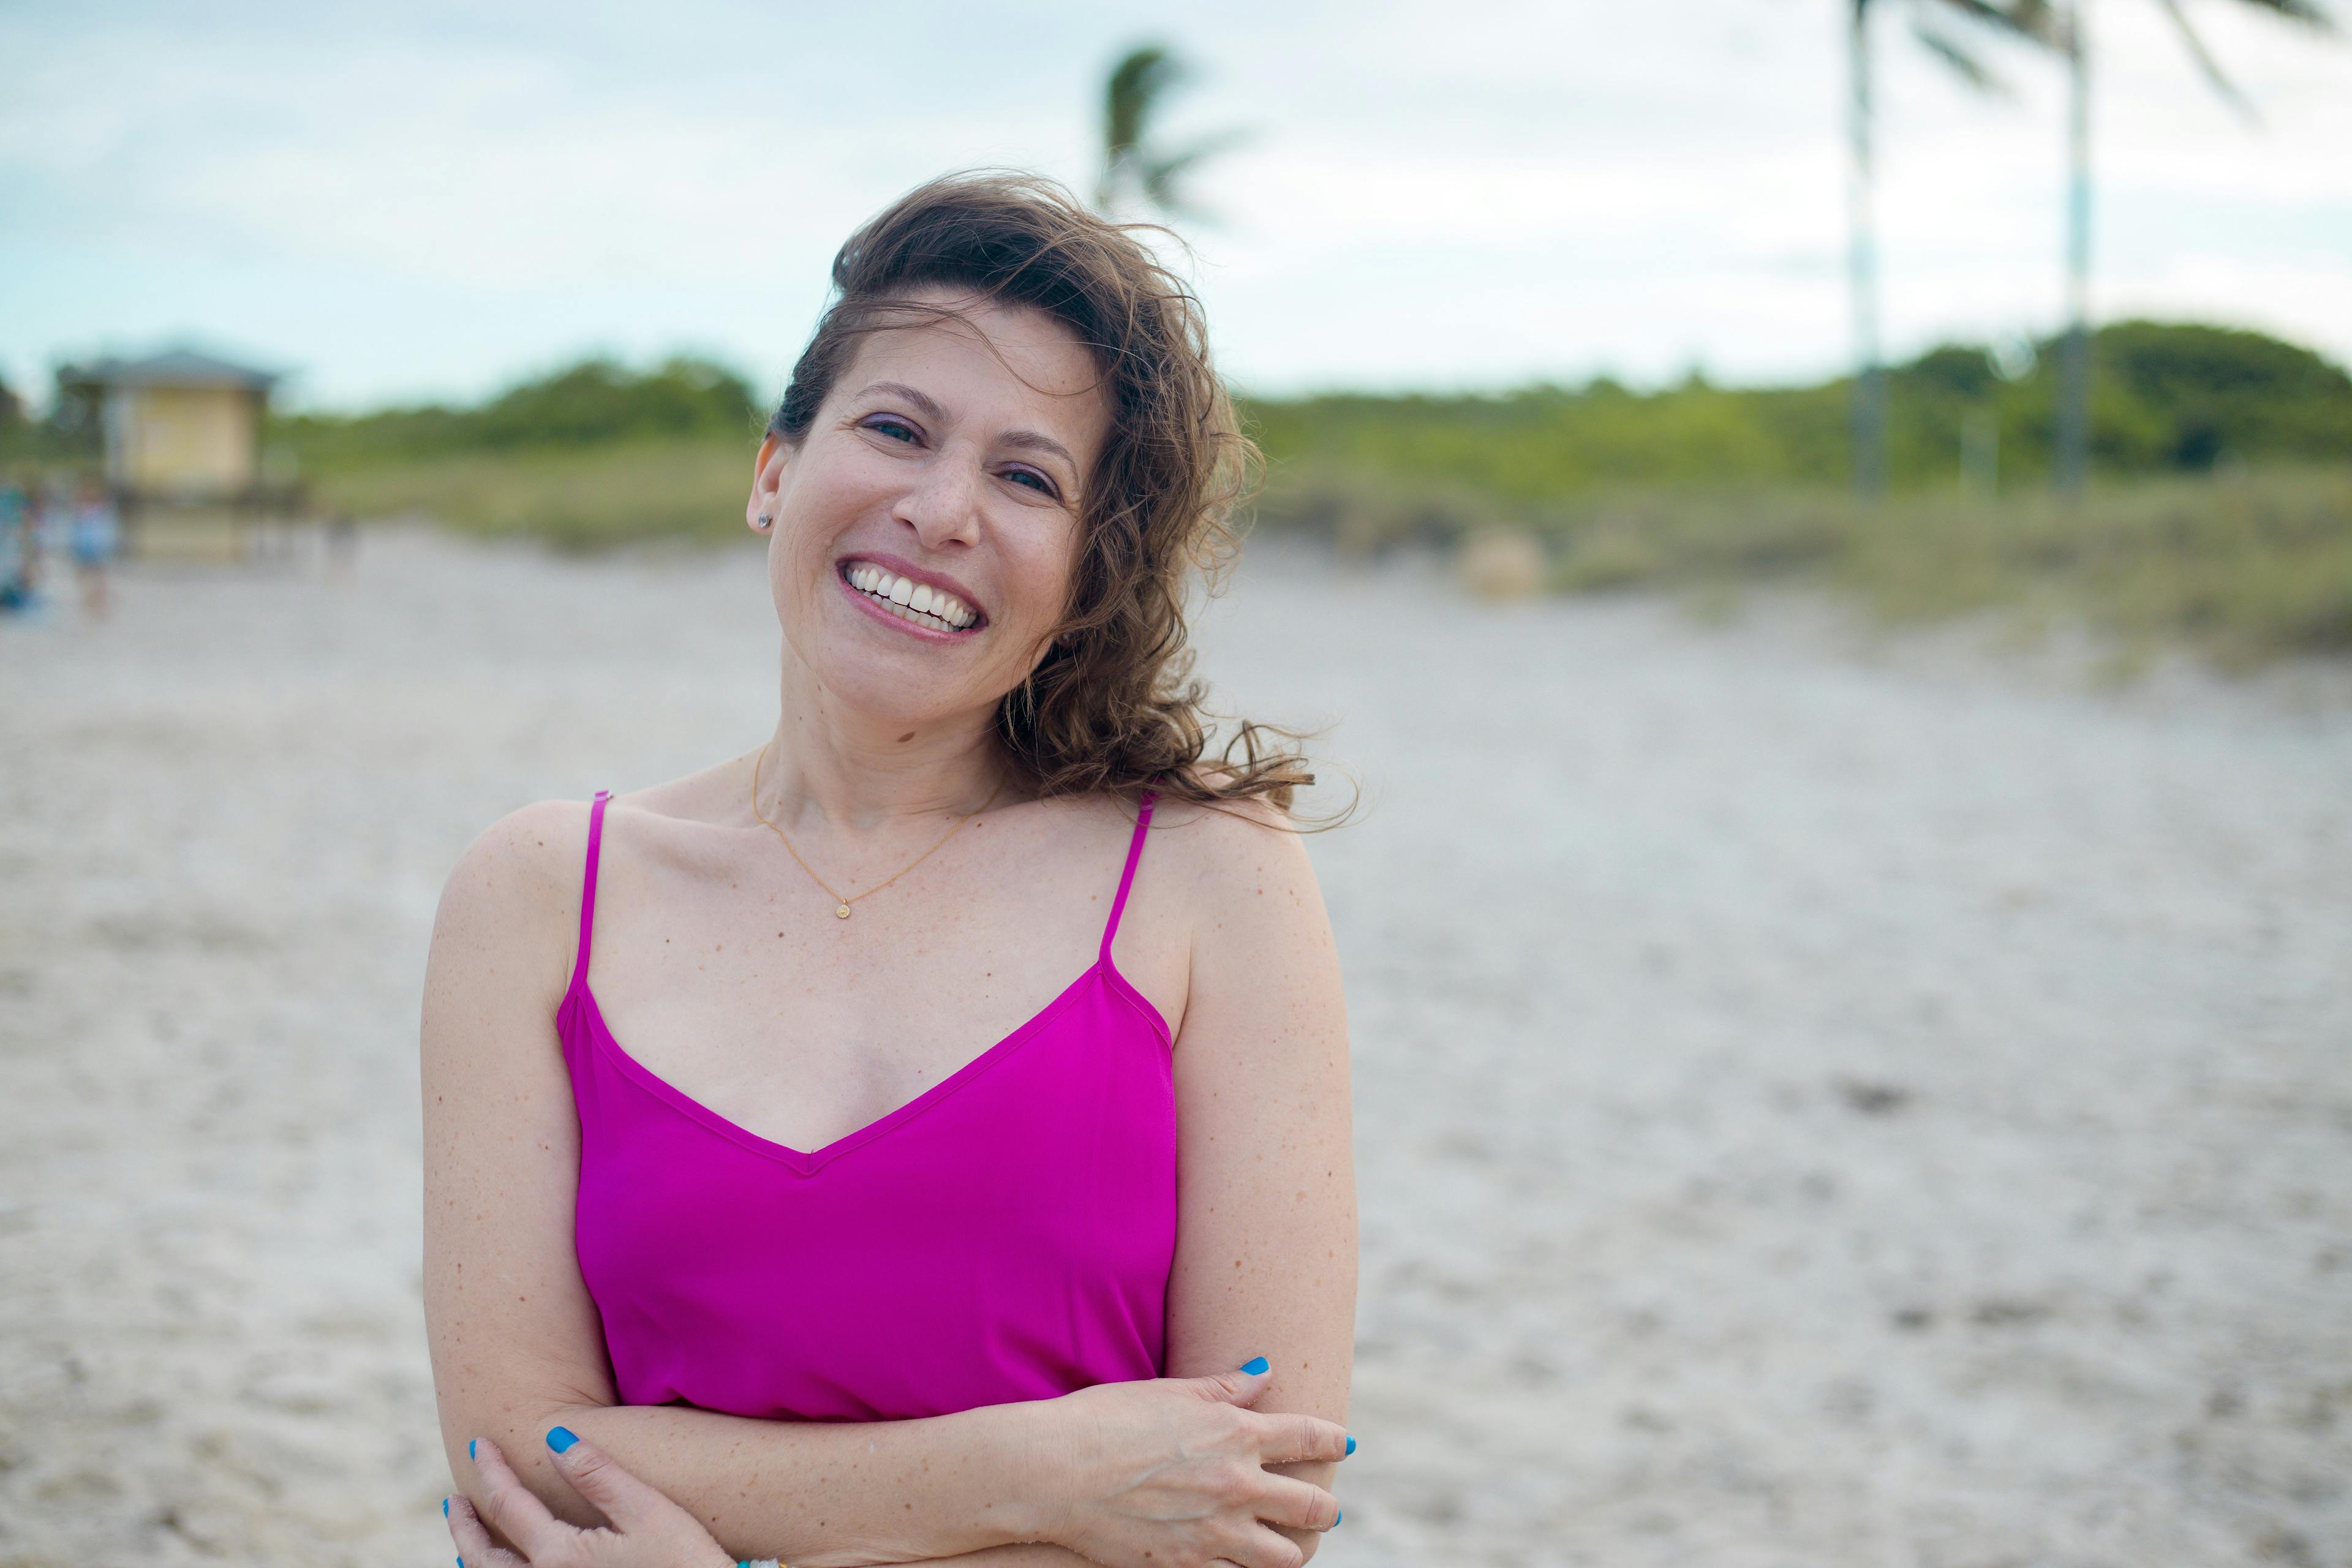 Cancer survivors, Sally Joy Wolf, smiling at the beach | Photo credit: Darcy Graf